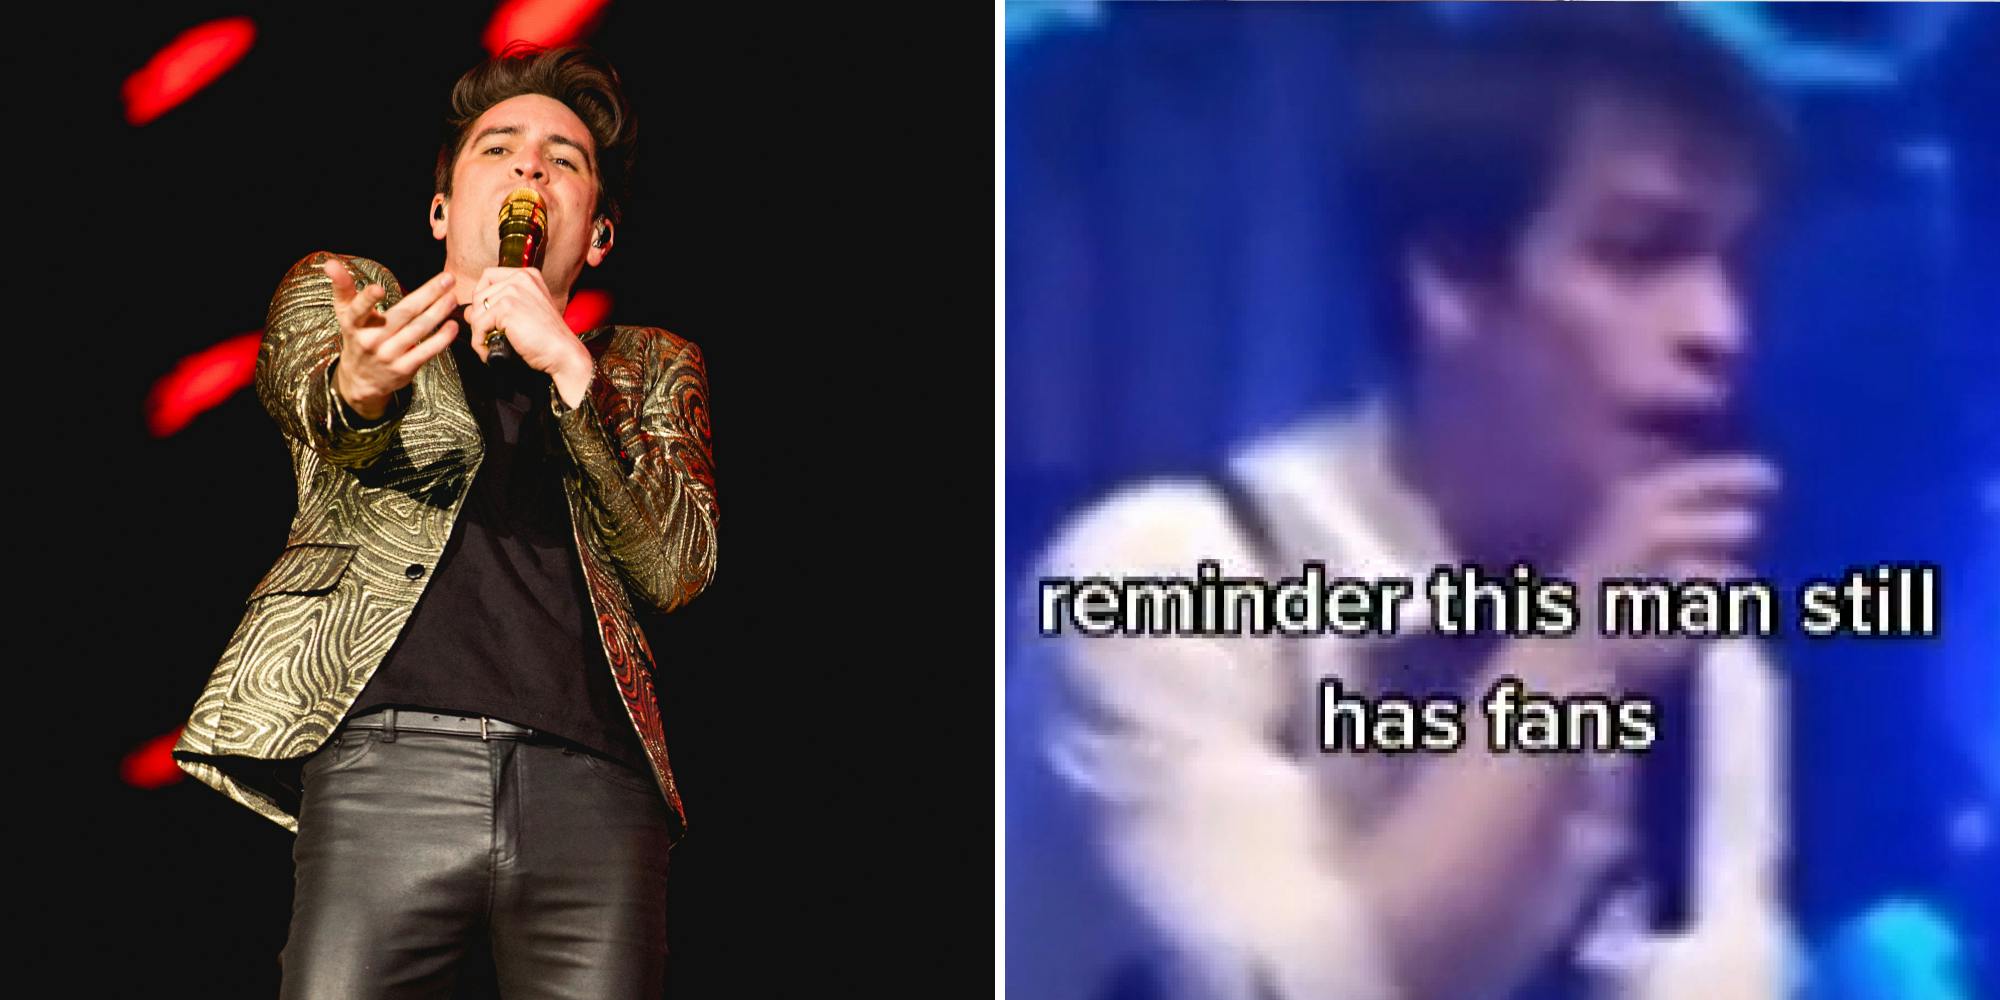 Brandon Urie Panic at the Disco preforming (l) Brandon Urie preforming caption "reminder this man still has fans" (r)